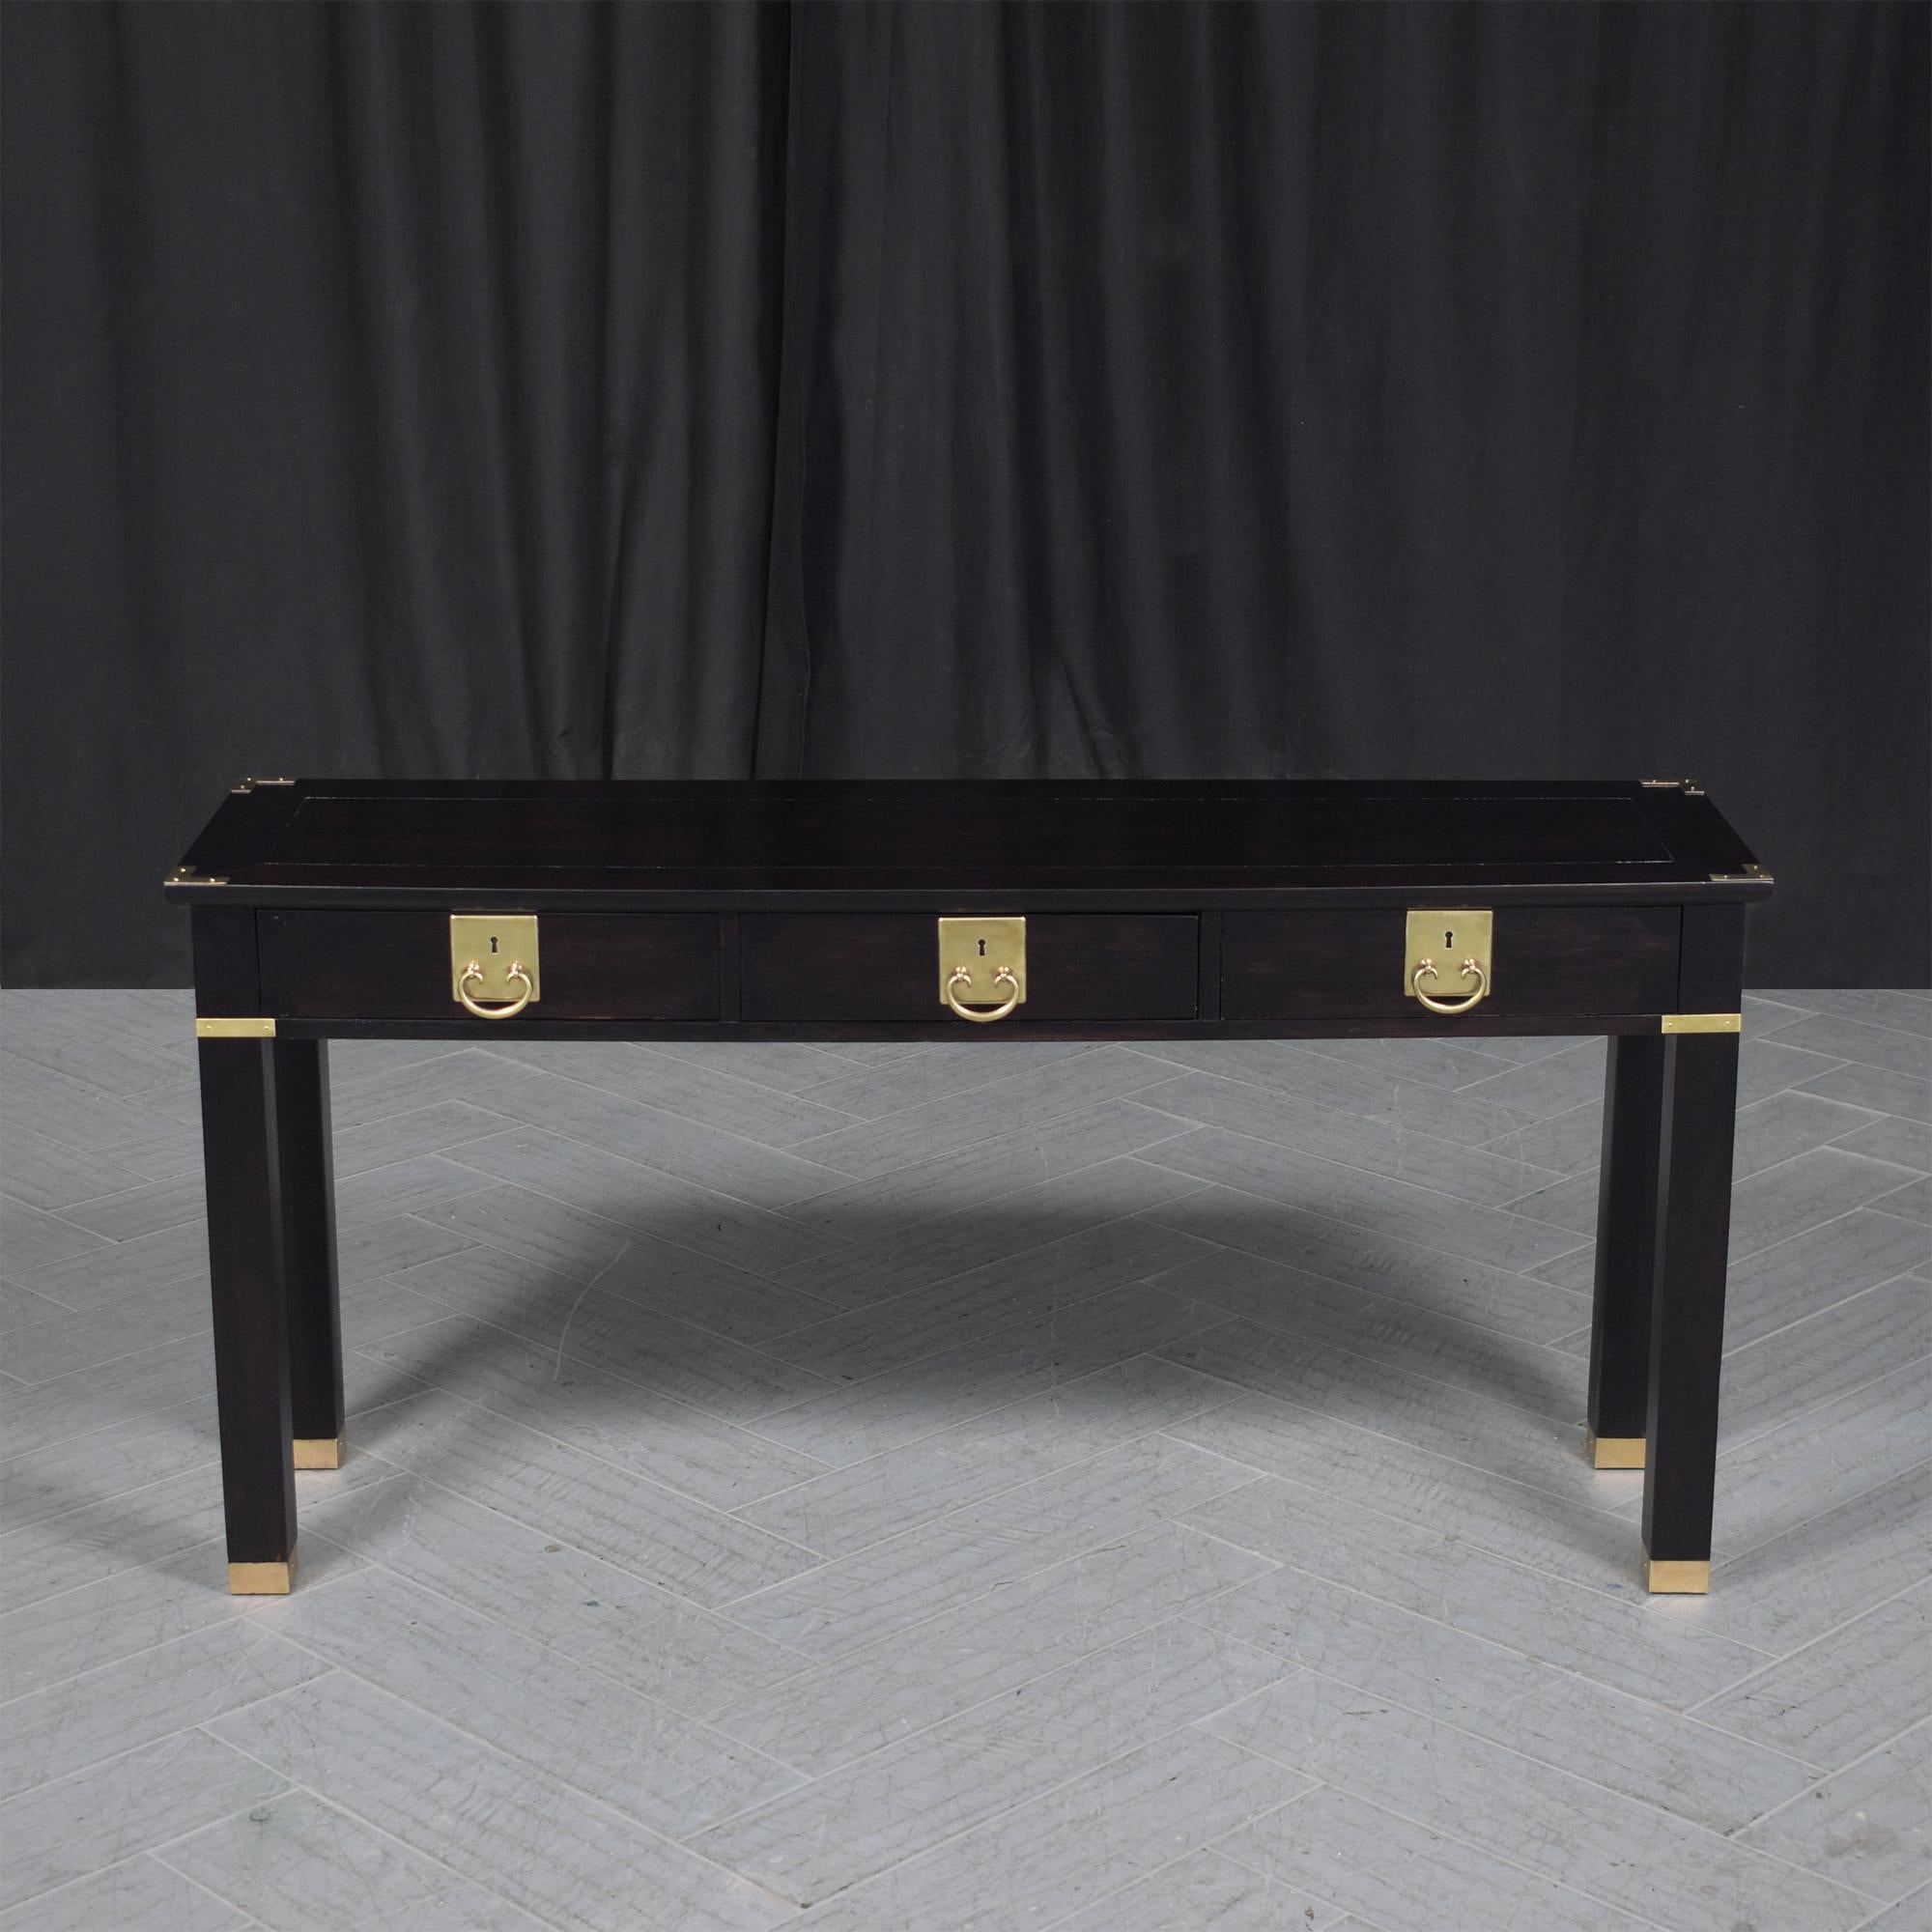 Discover the unparalleled elegance of our vintage console table, a testament to exquisite craftsmanship and timeless design. This piece has been lovingly restored by our expert team, crafted from solid white oak wood to ensure both stunning beauty